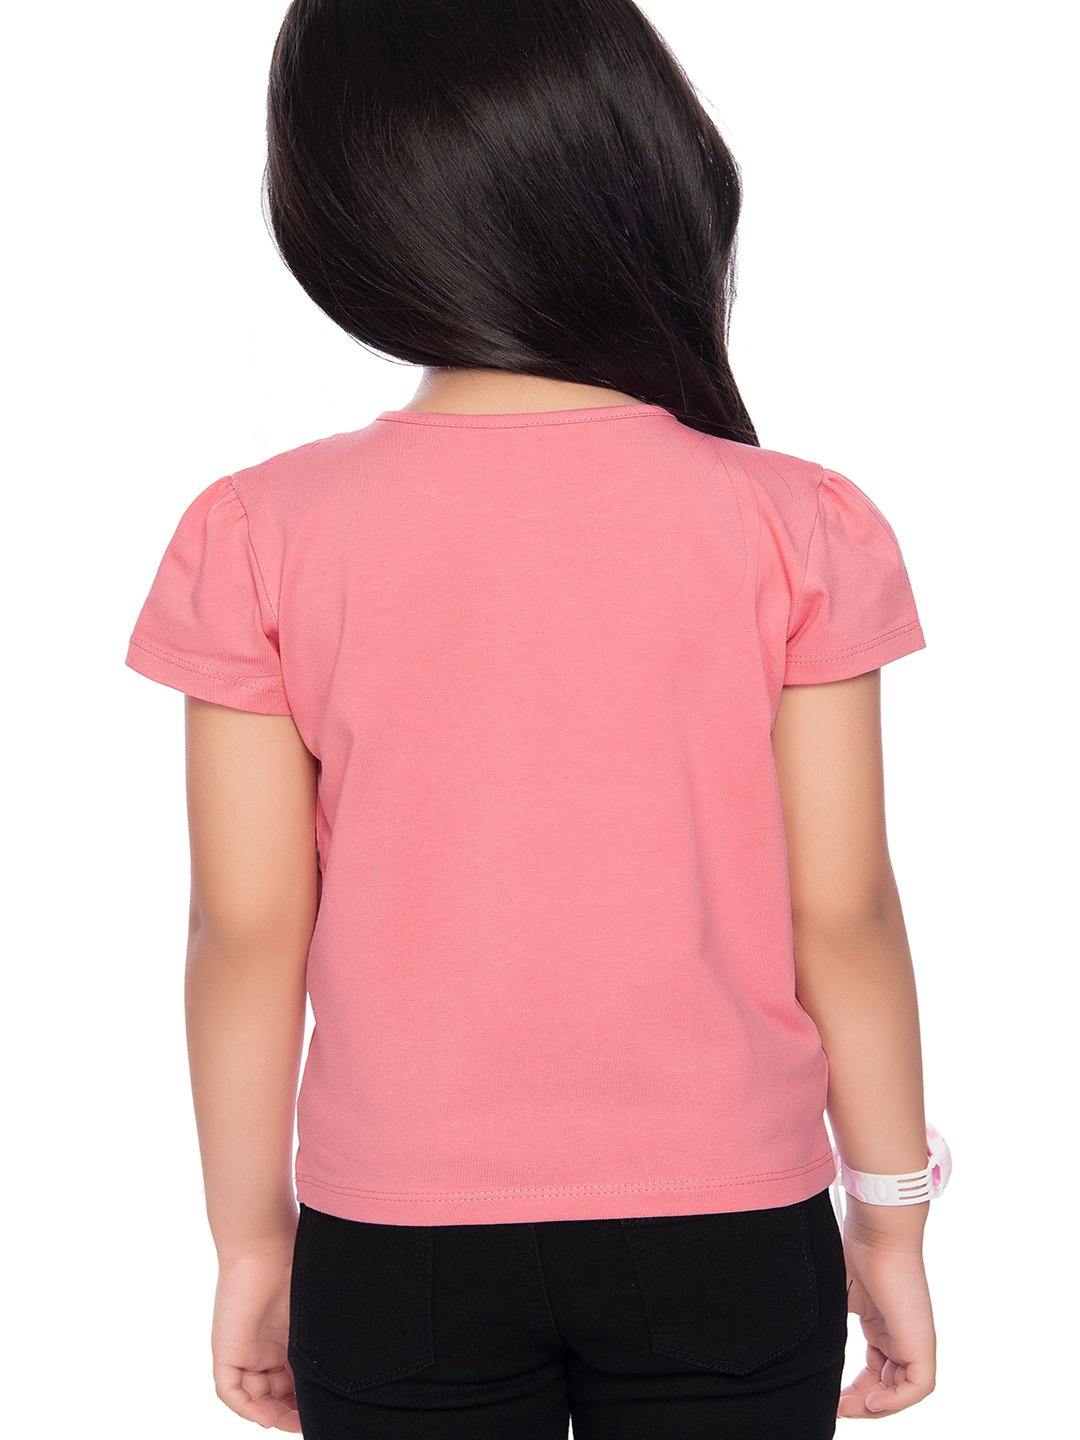 Tiny Baby Peach Colored Top - T-110 Peach - TINY BABY INDIA shop.tinybaby.in